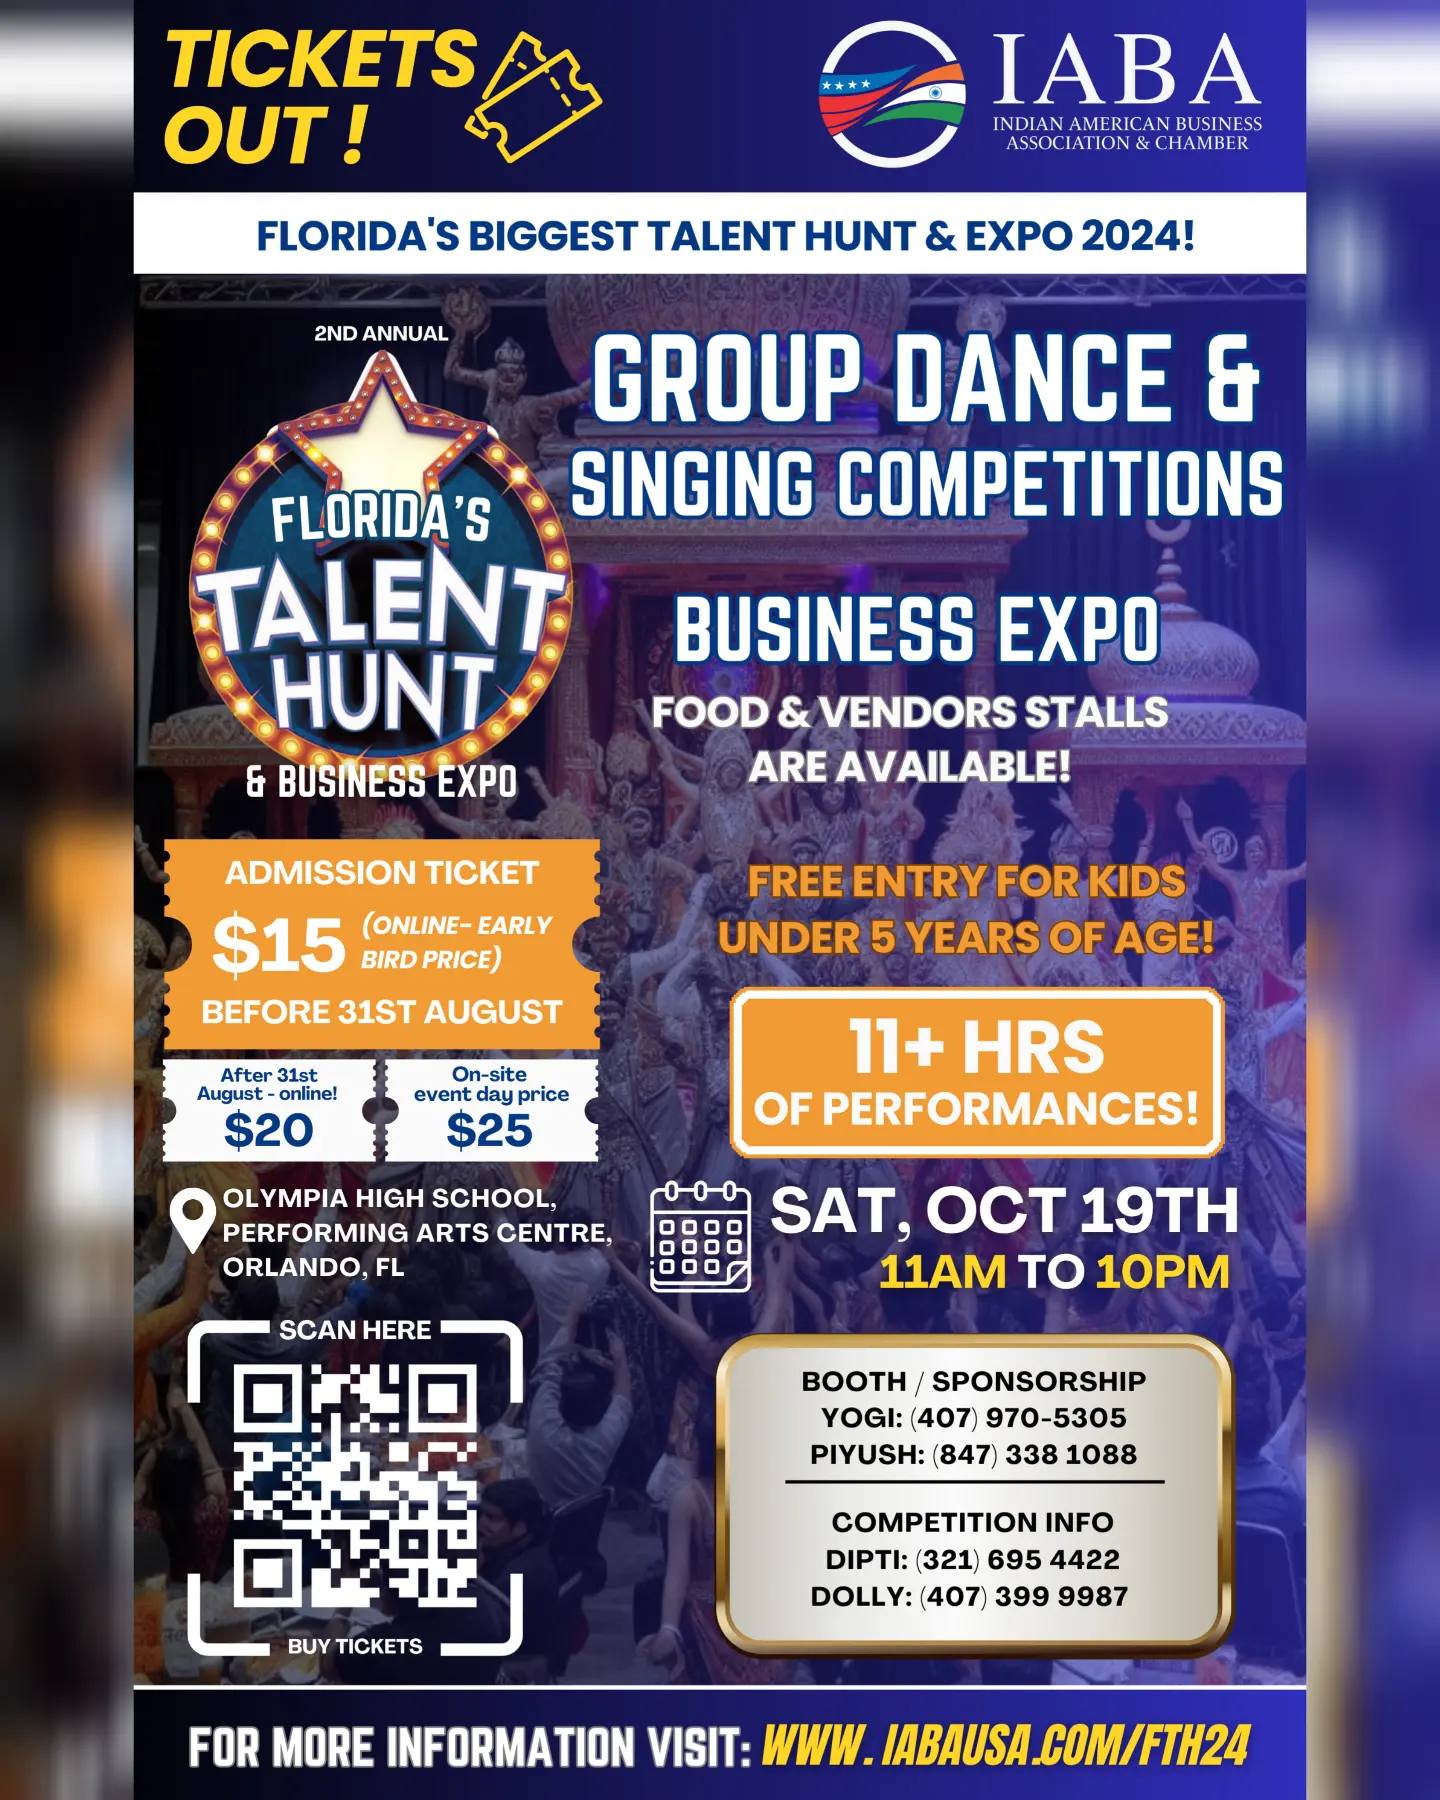 2nd Annual Florida's Talent Hunt & Business Expo